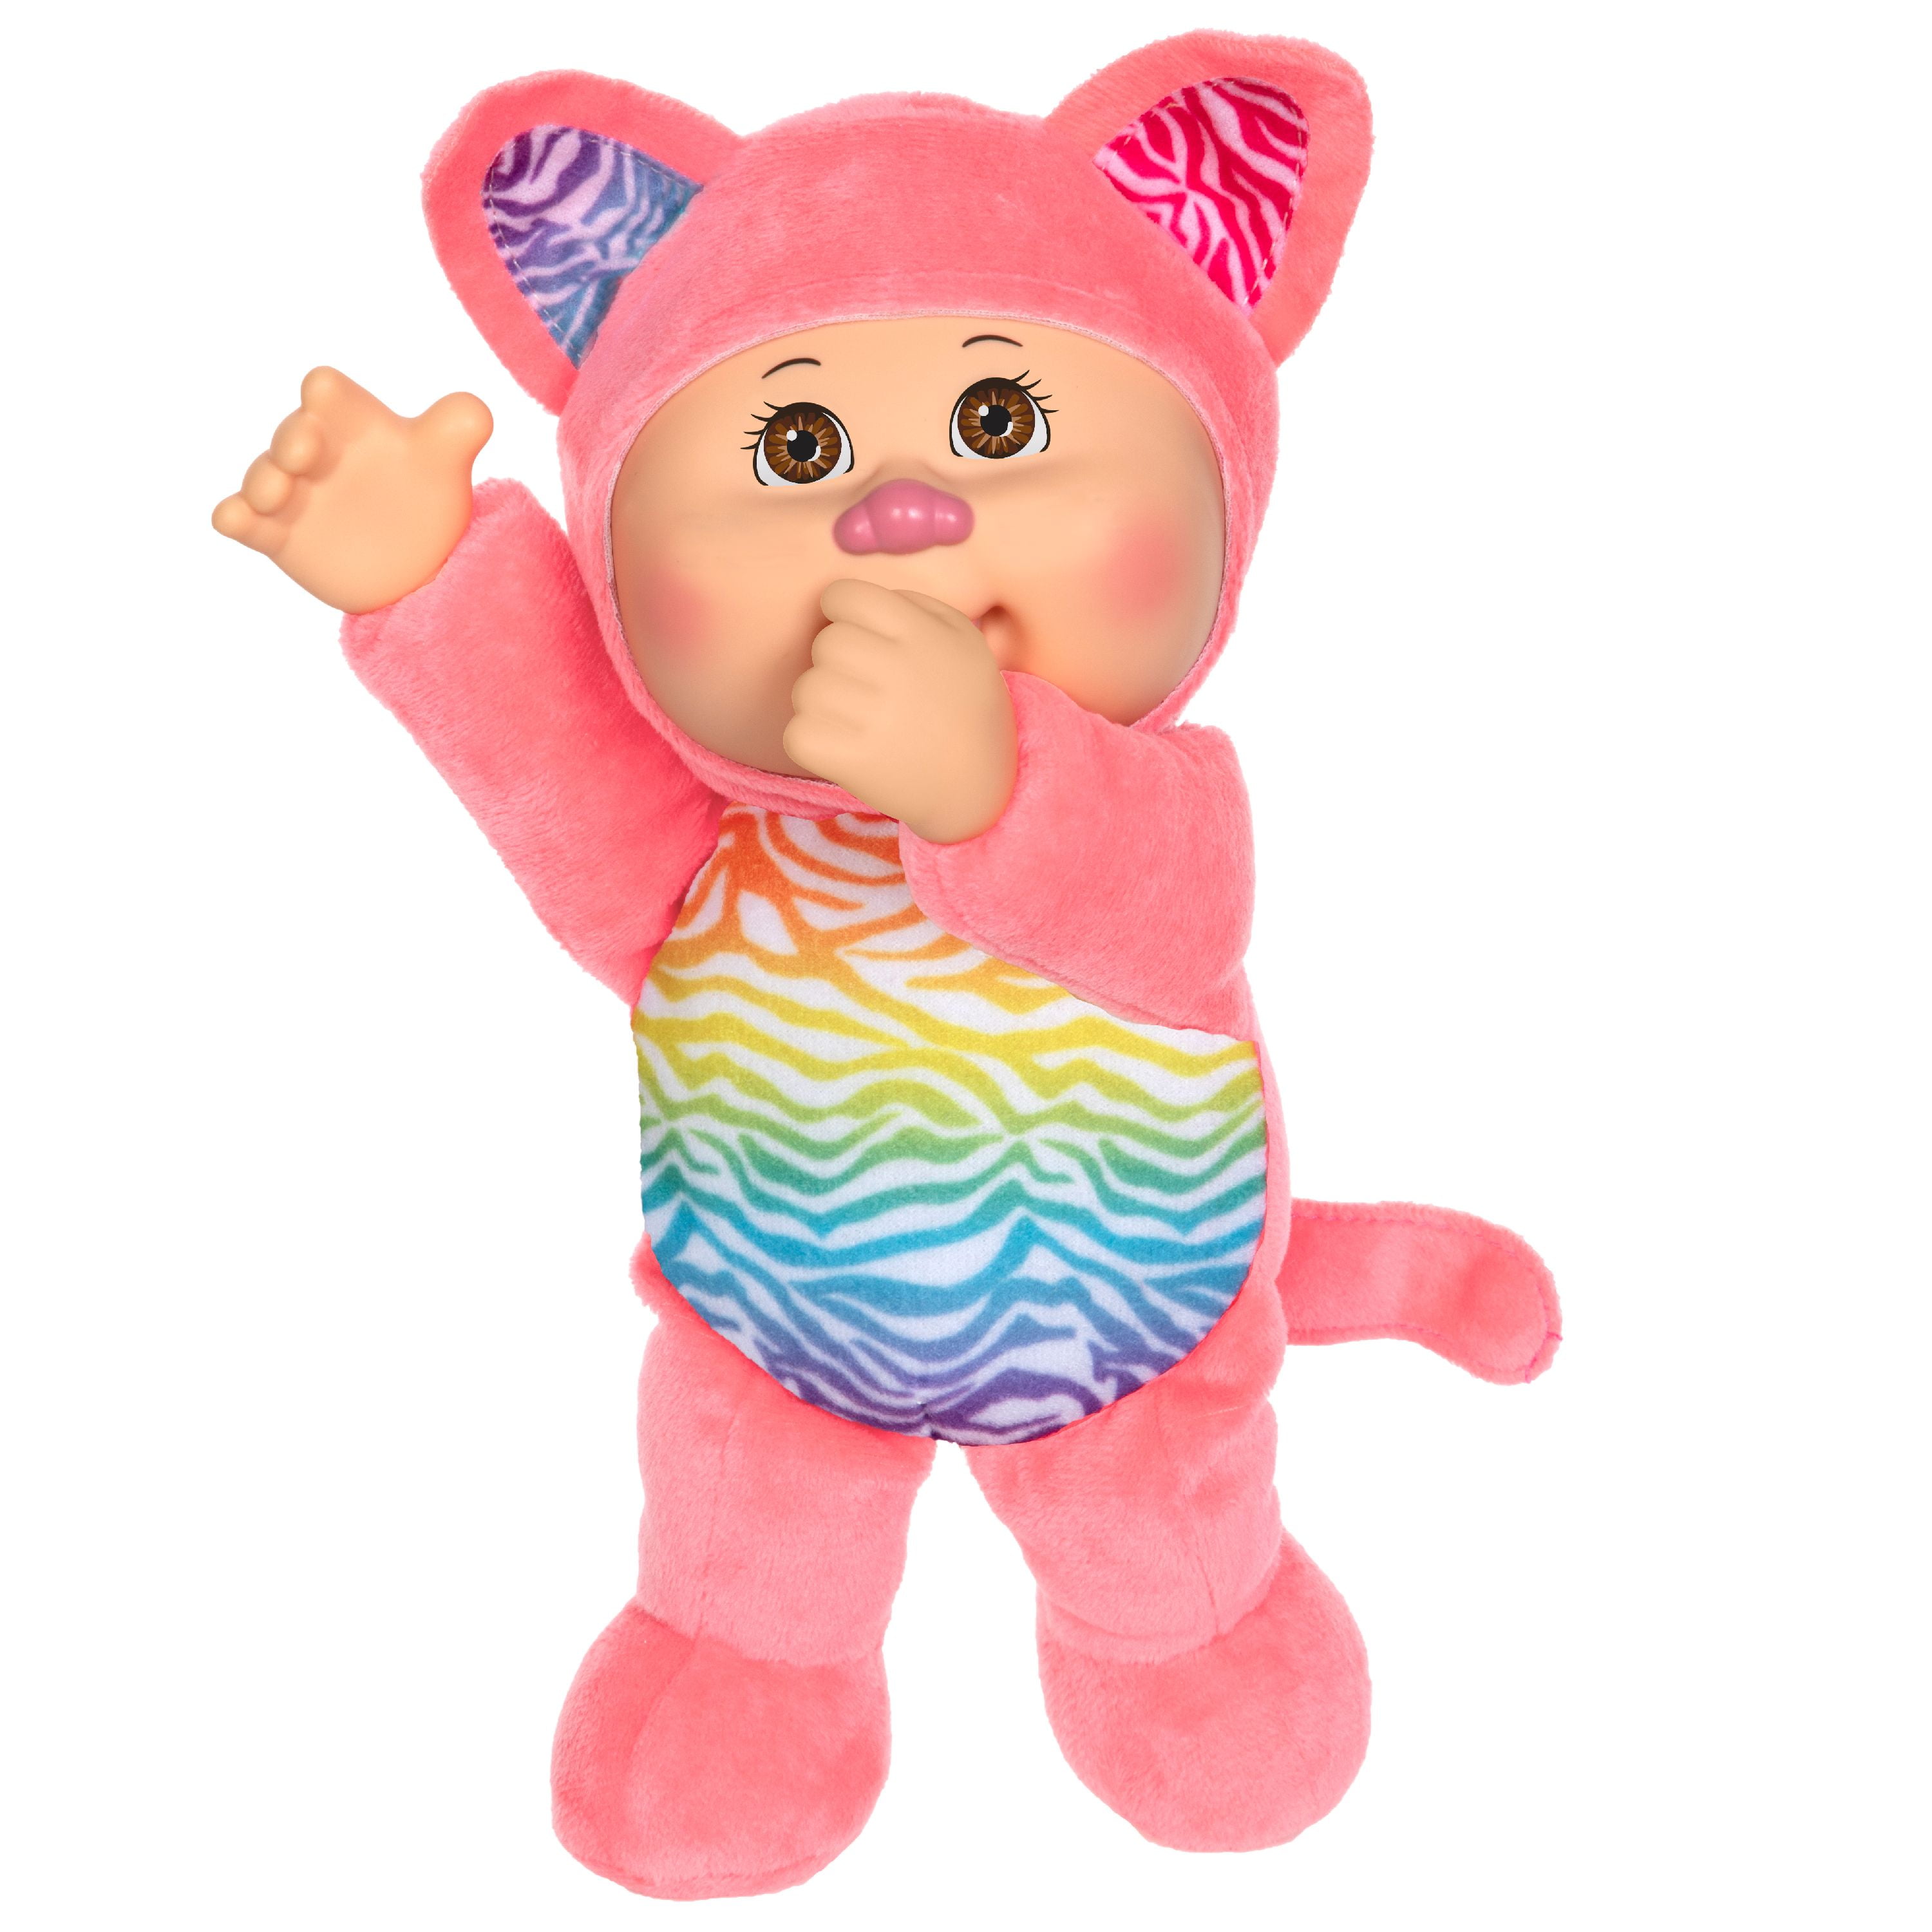 Cabbage Patch Kids Baby so Real Interactive Doll Cat Outfit Blonde Blue Eden for sale online 